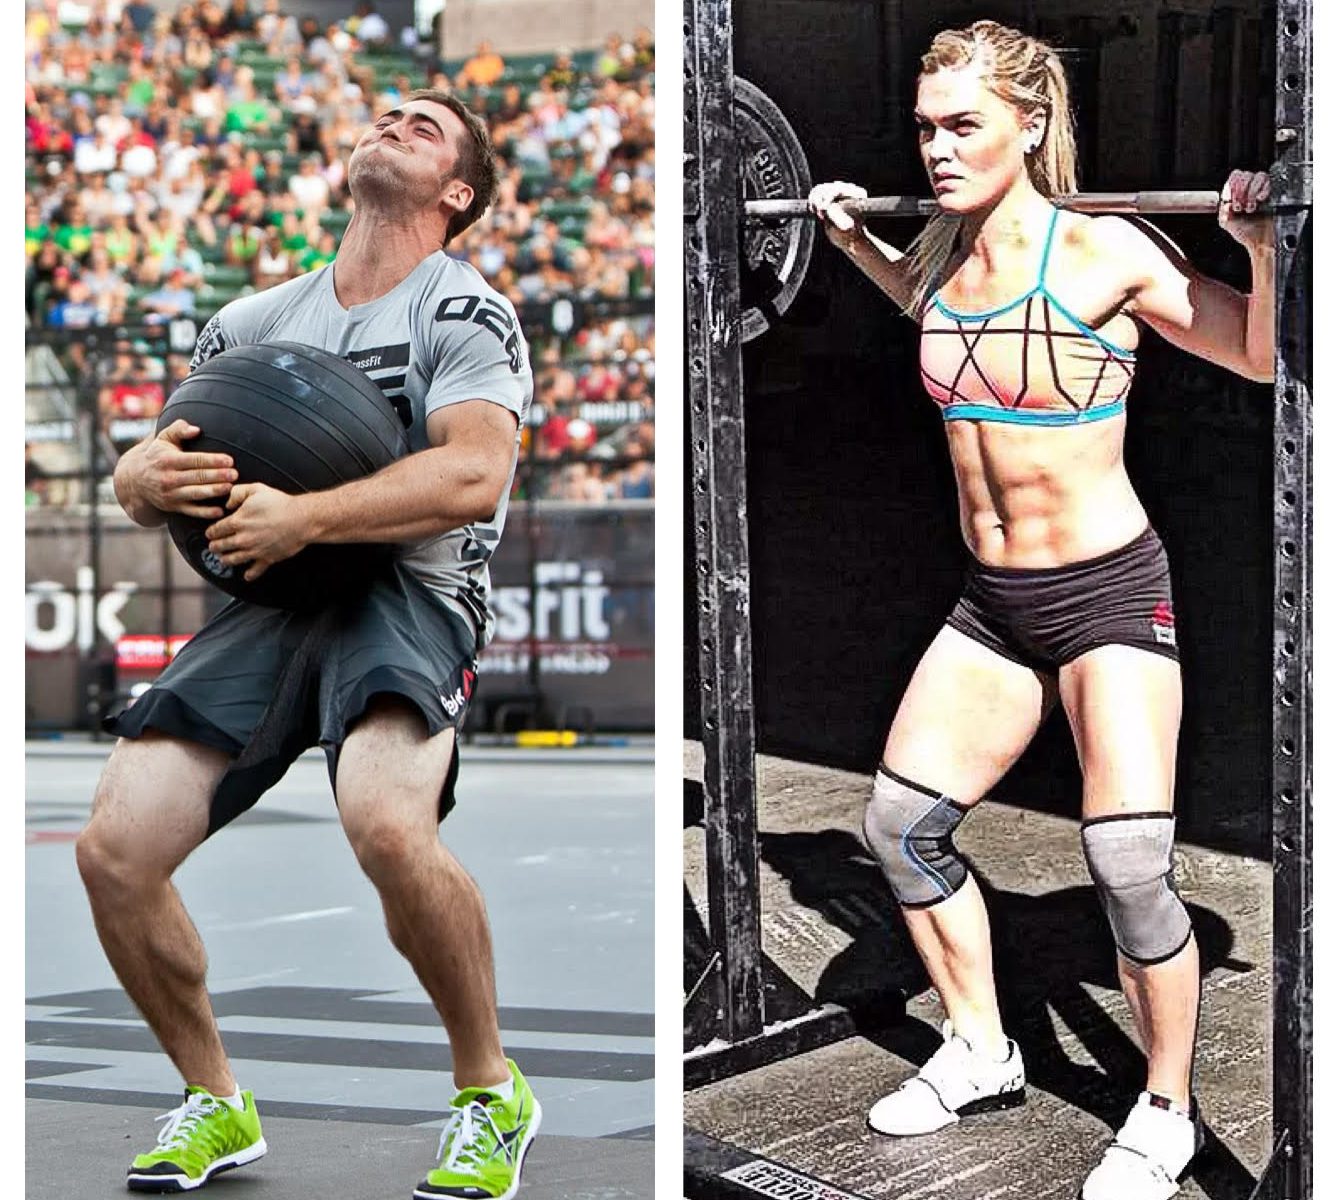 crossfit games champions Archives - WOD Life